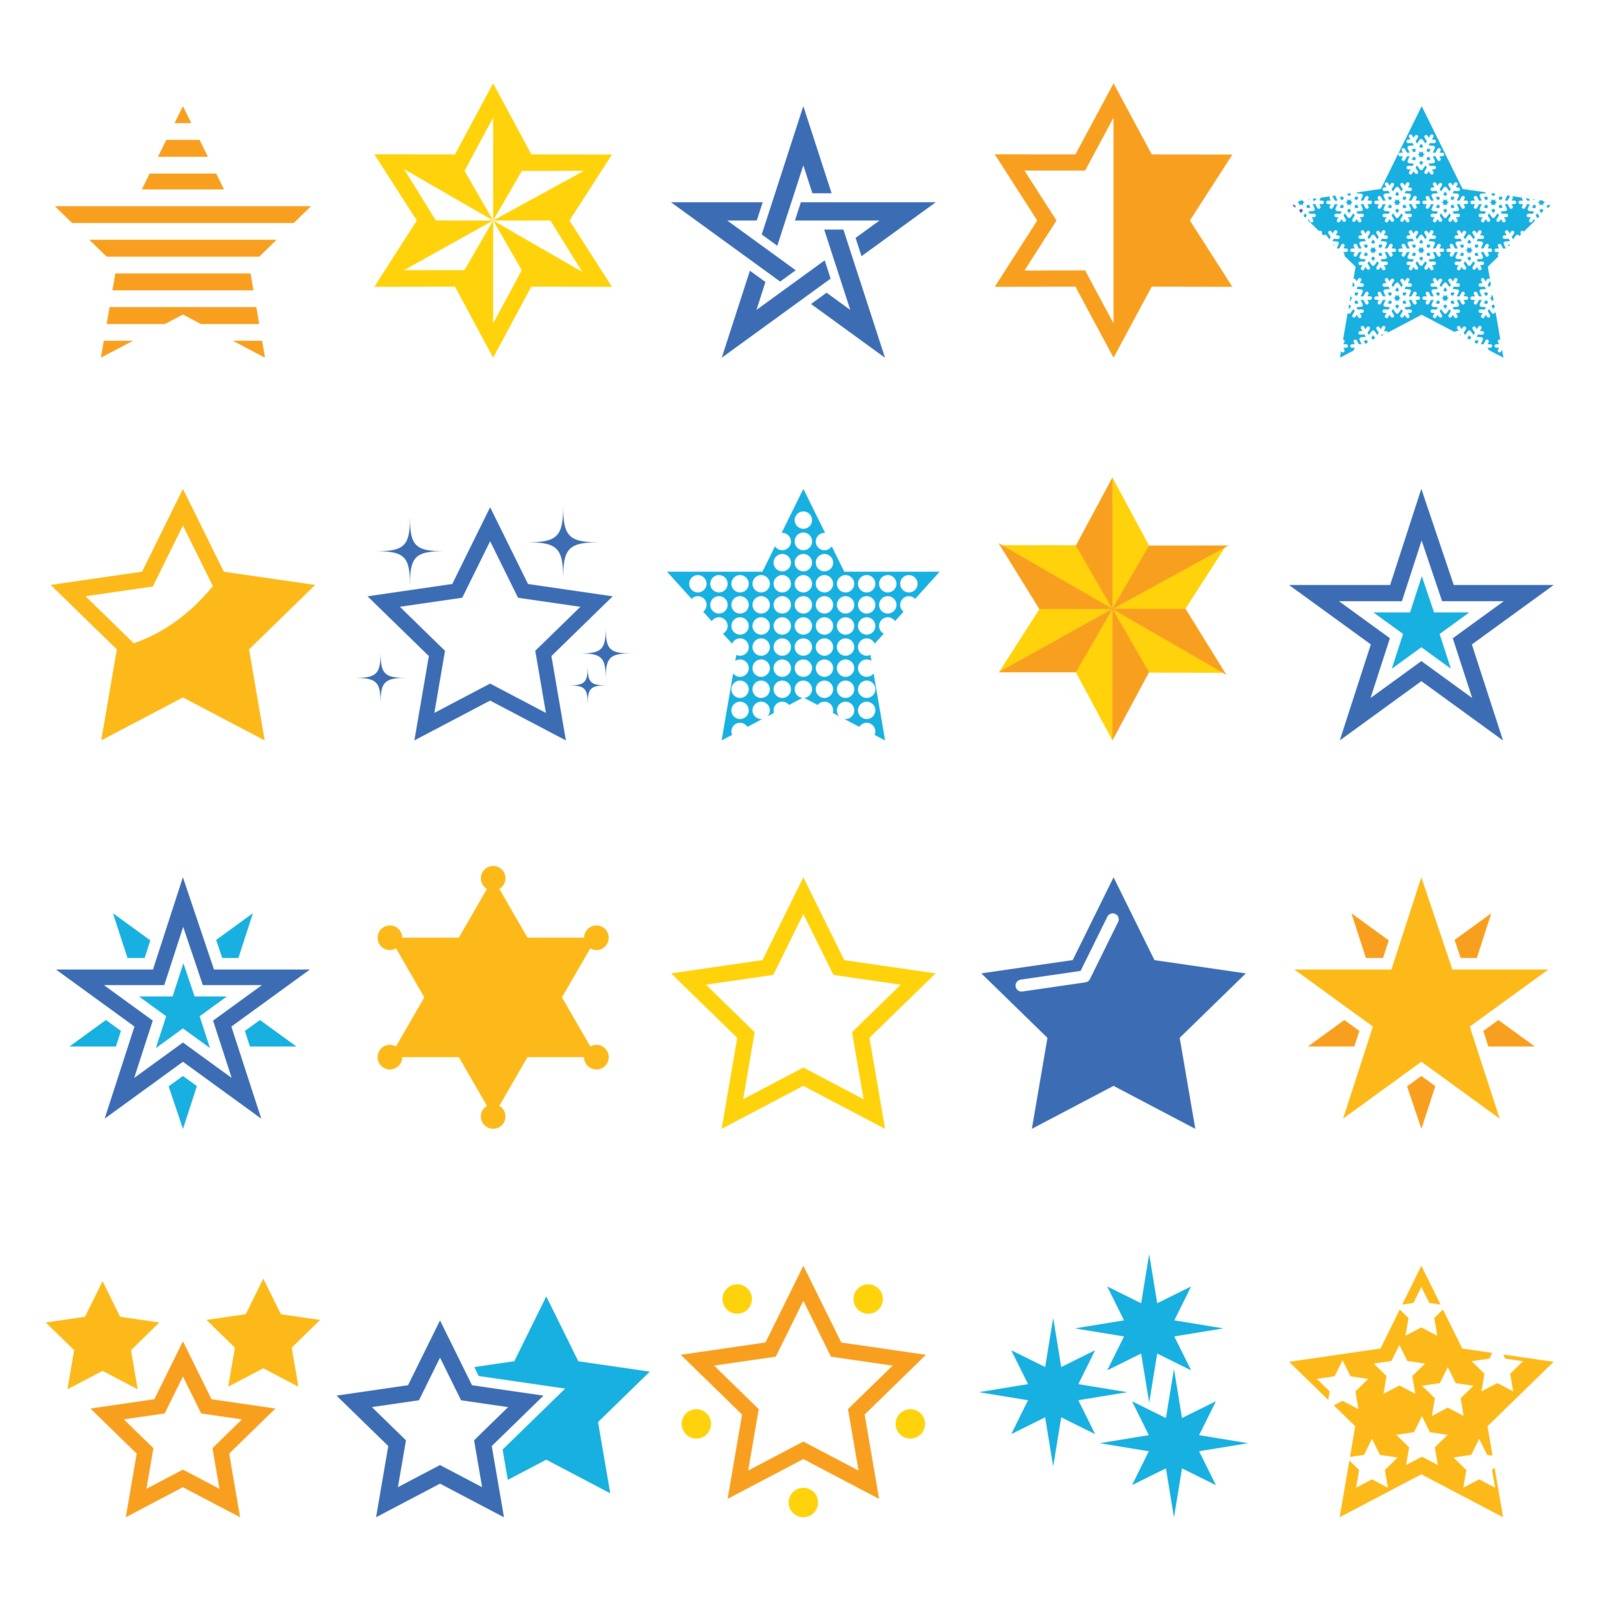 Winter Christmas icons set- stars and sparkles isolated on white